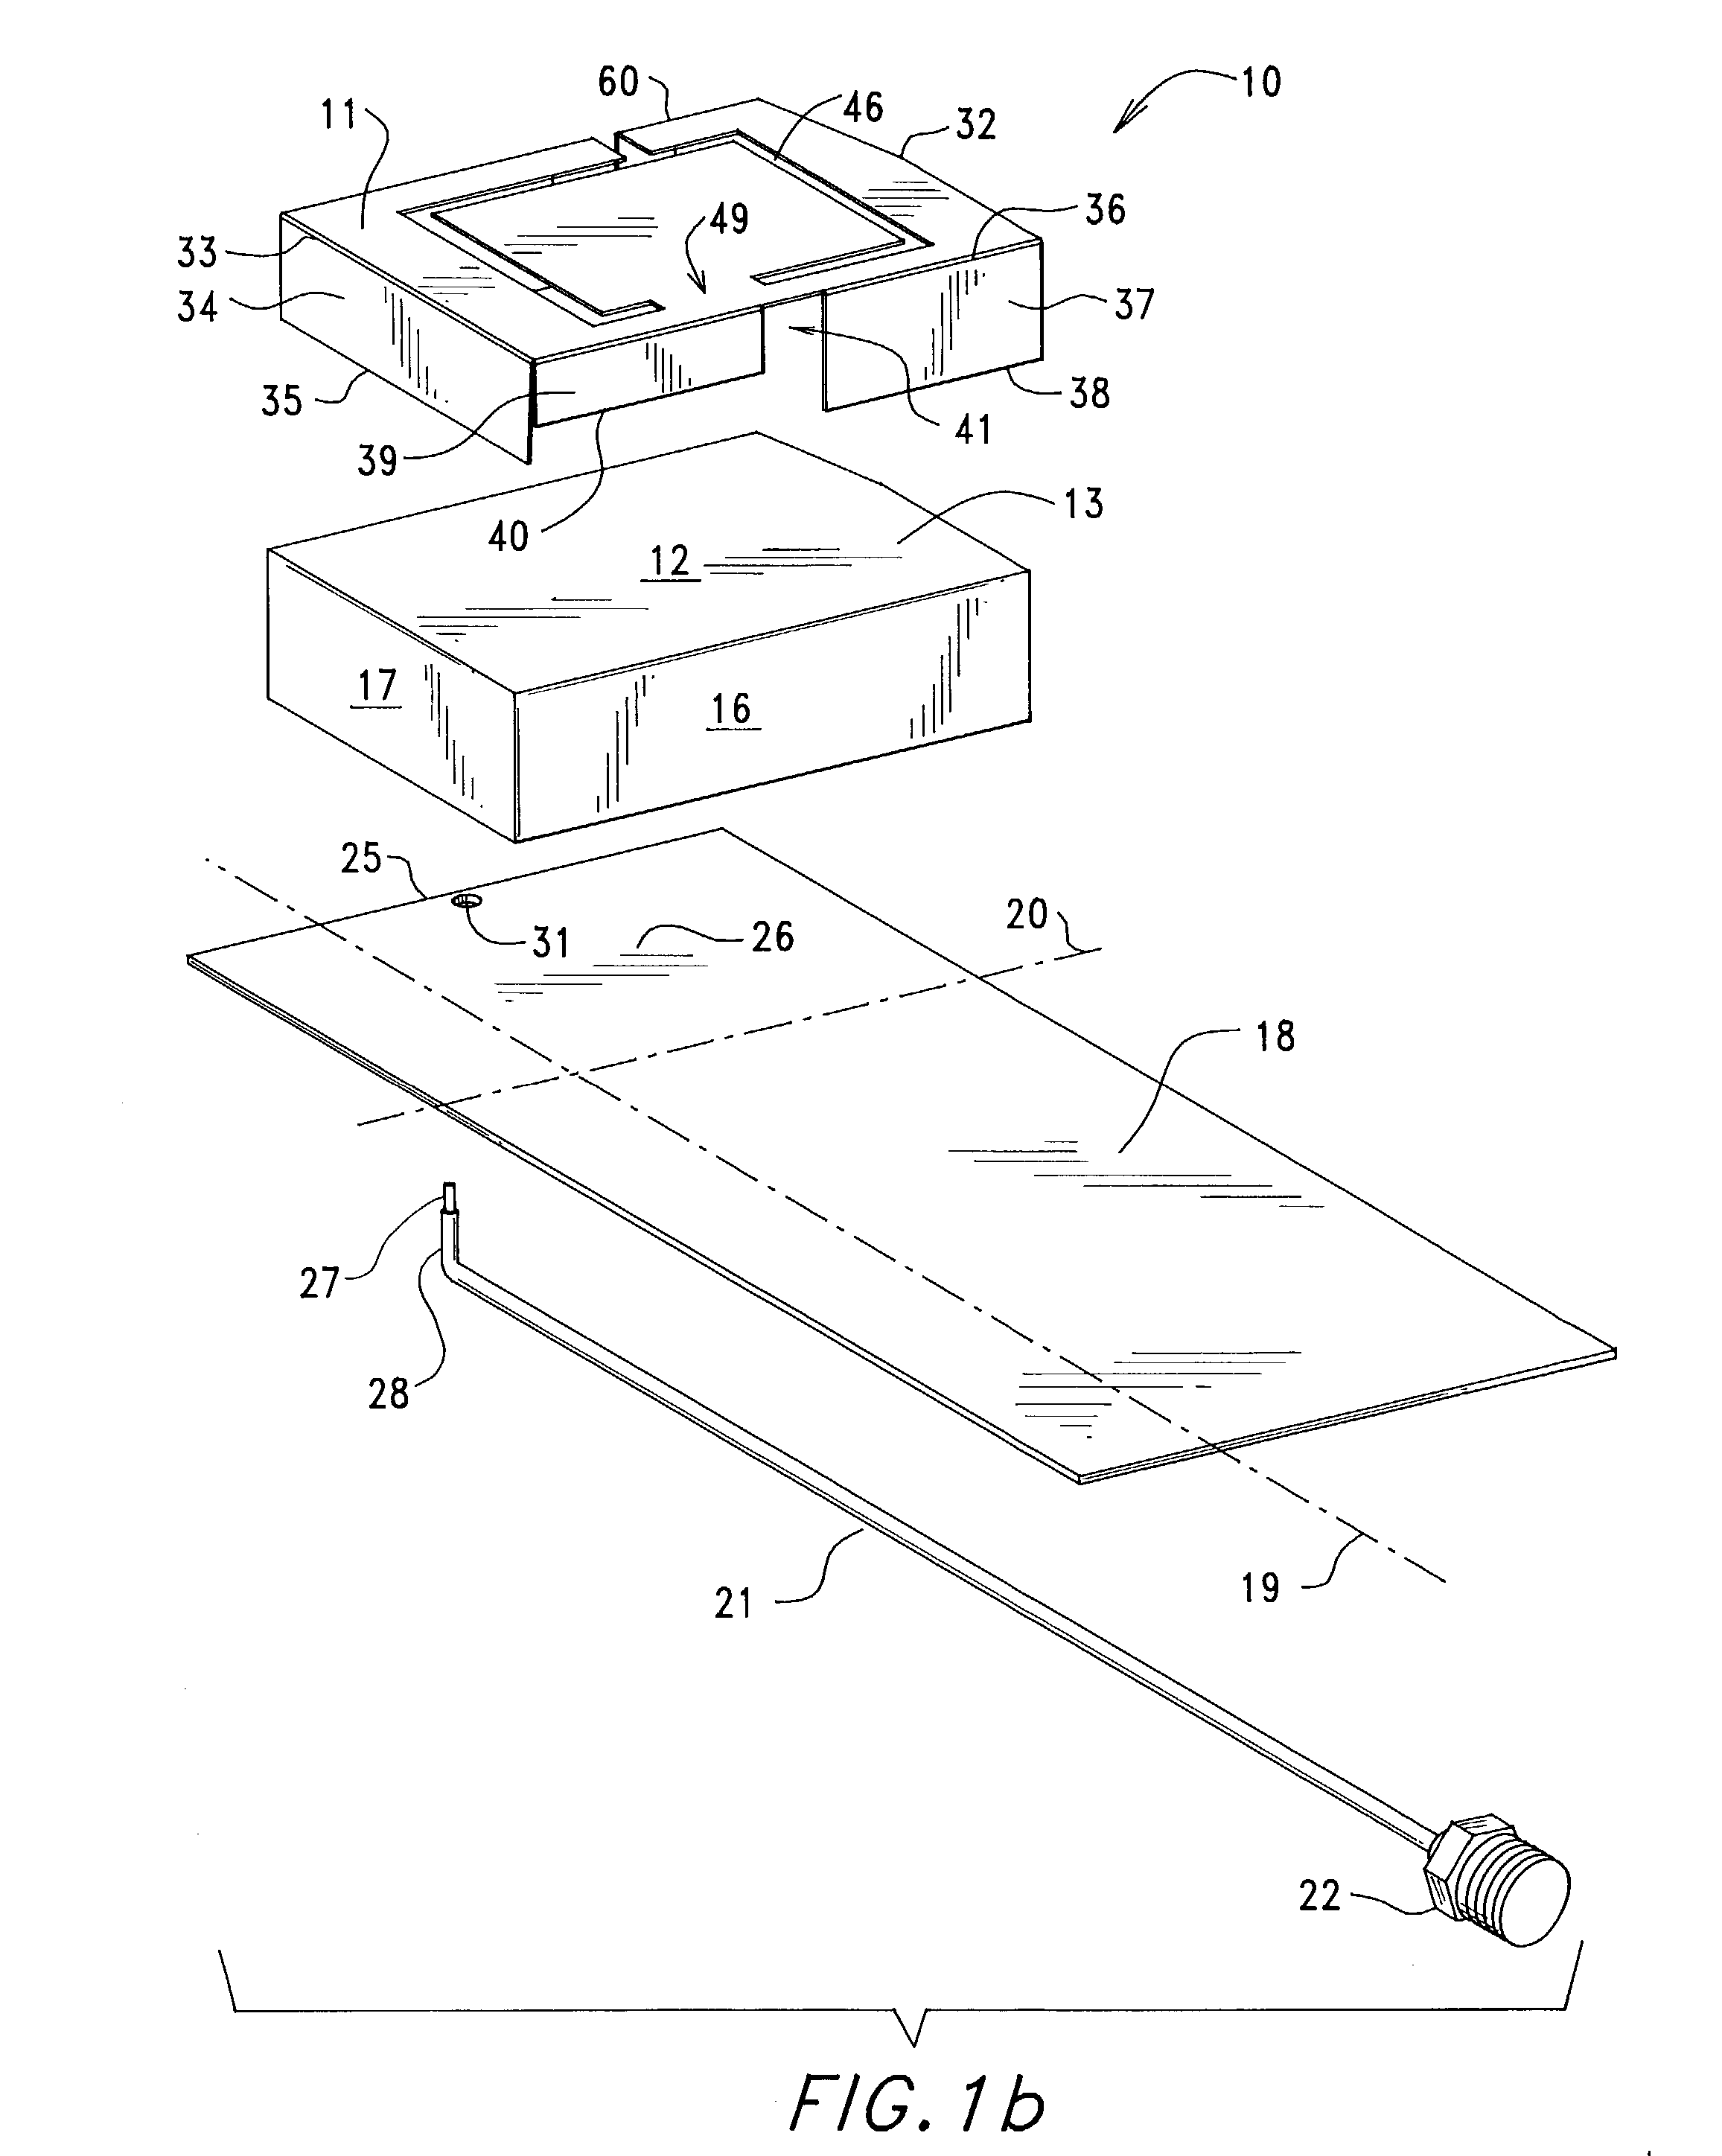 Planar inverted-f-antenna (PIFA) having a slotted radiating element providing global cellular and gps-bluetooth frequency response